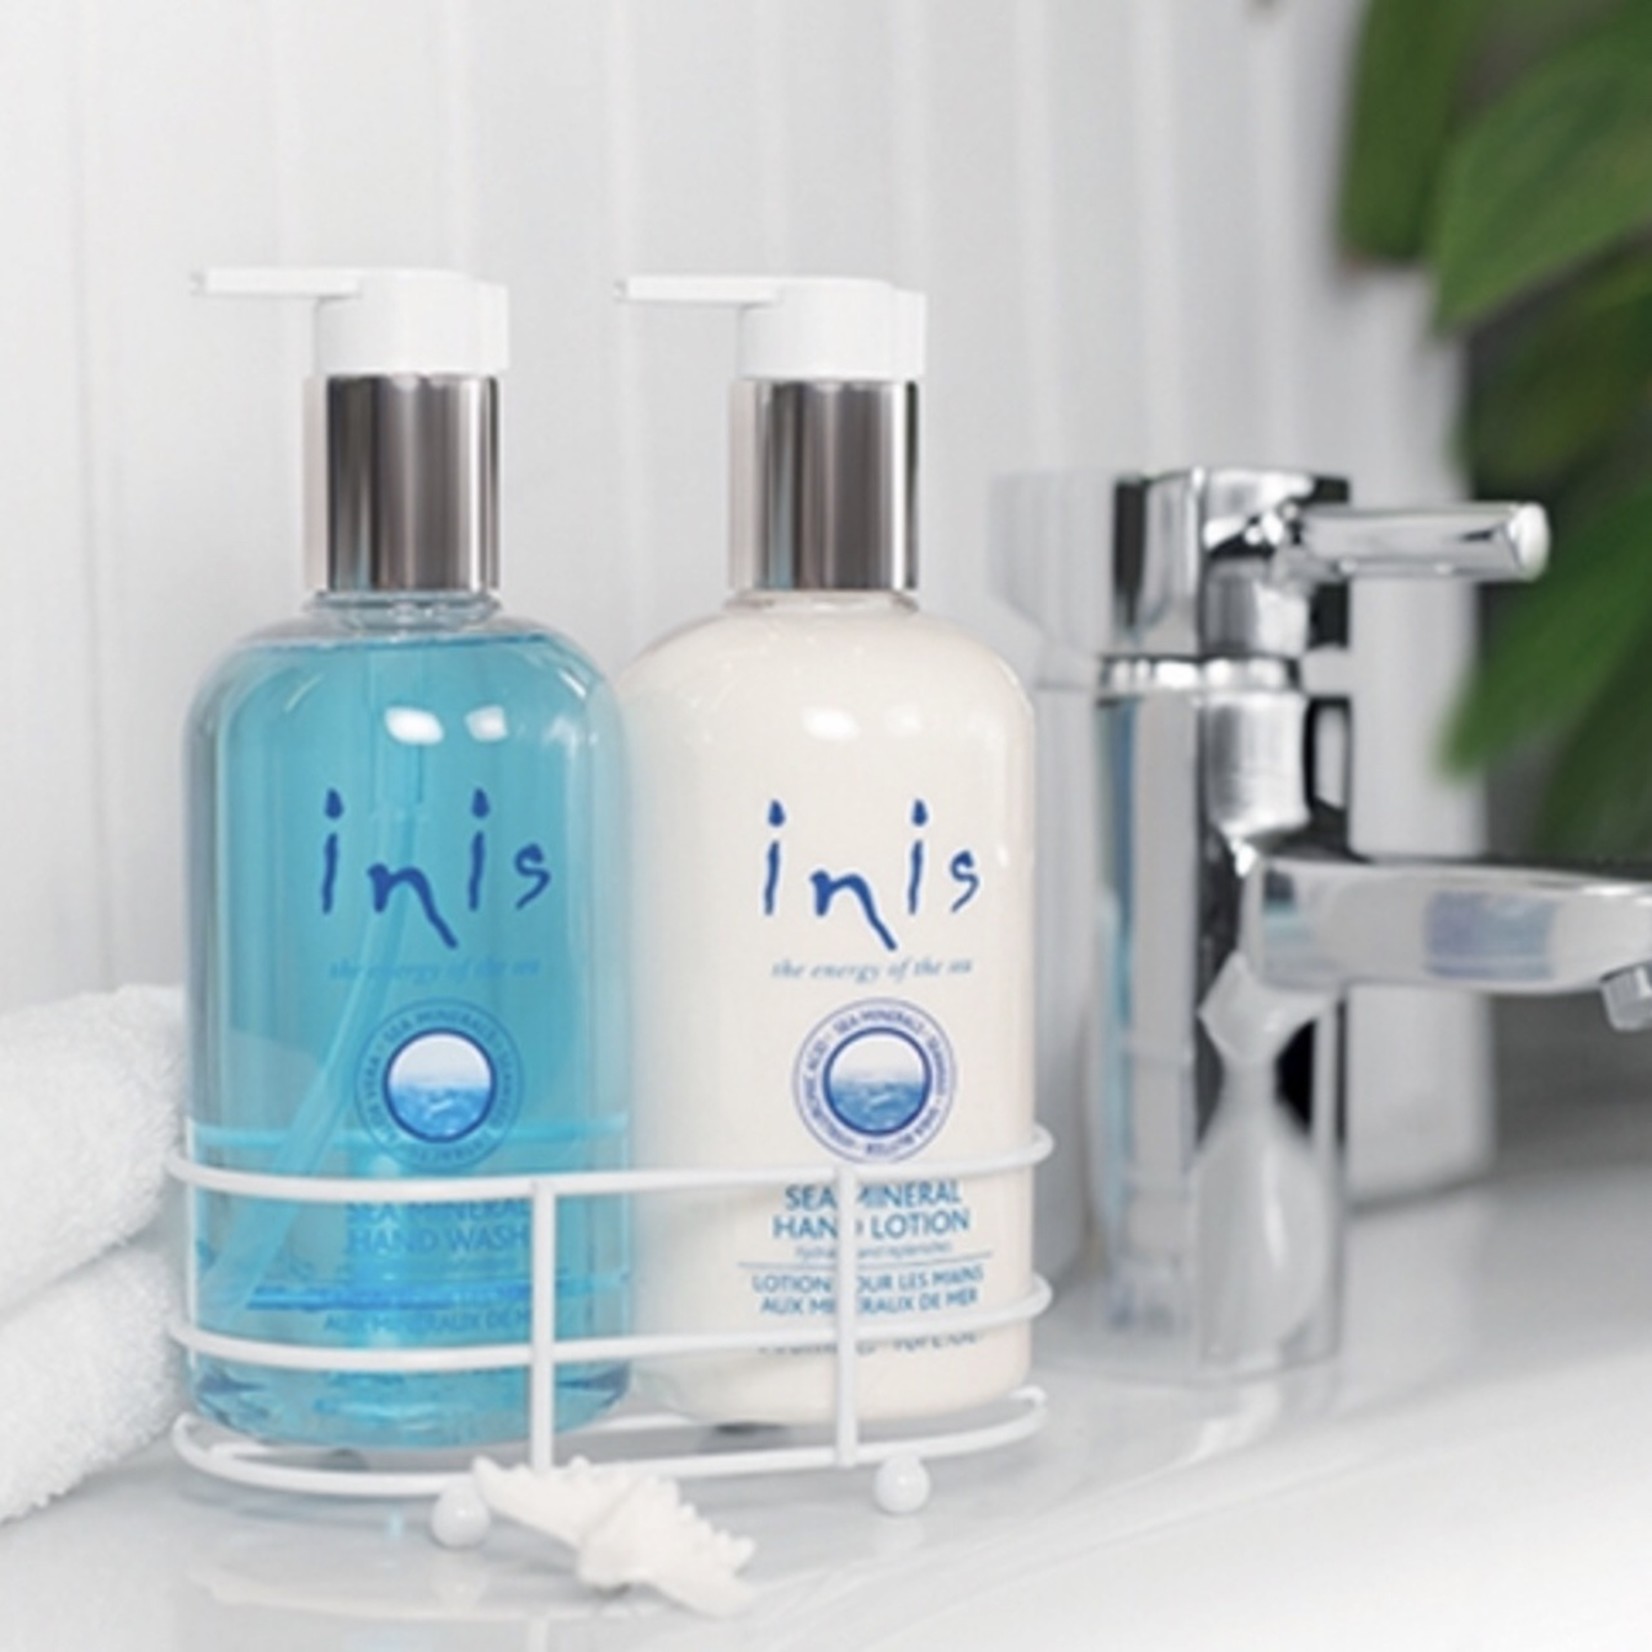 Inis Inis - Hand Care Caddy